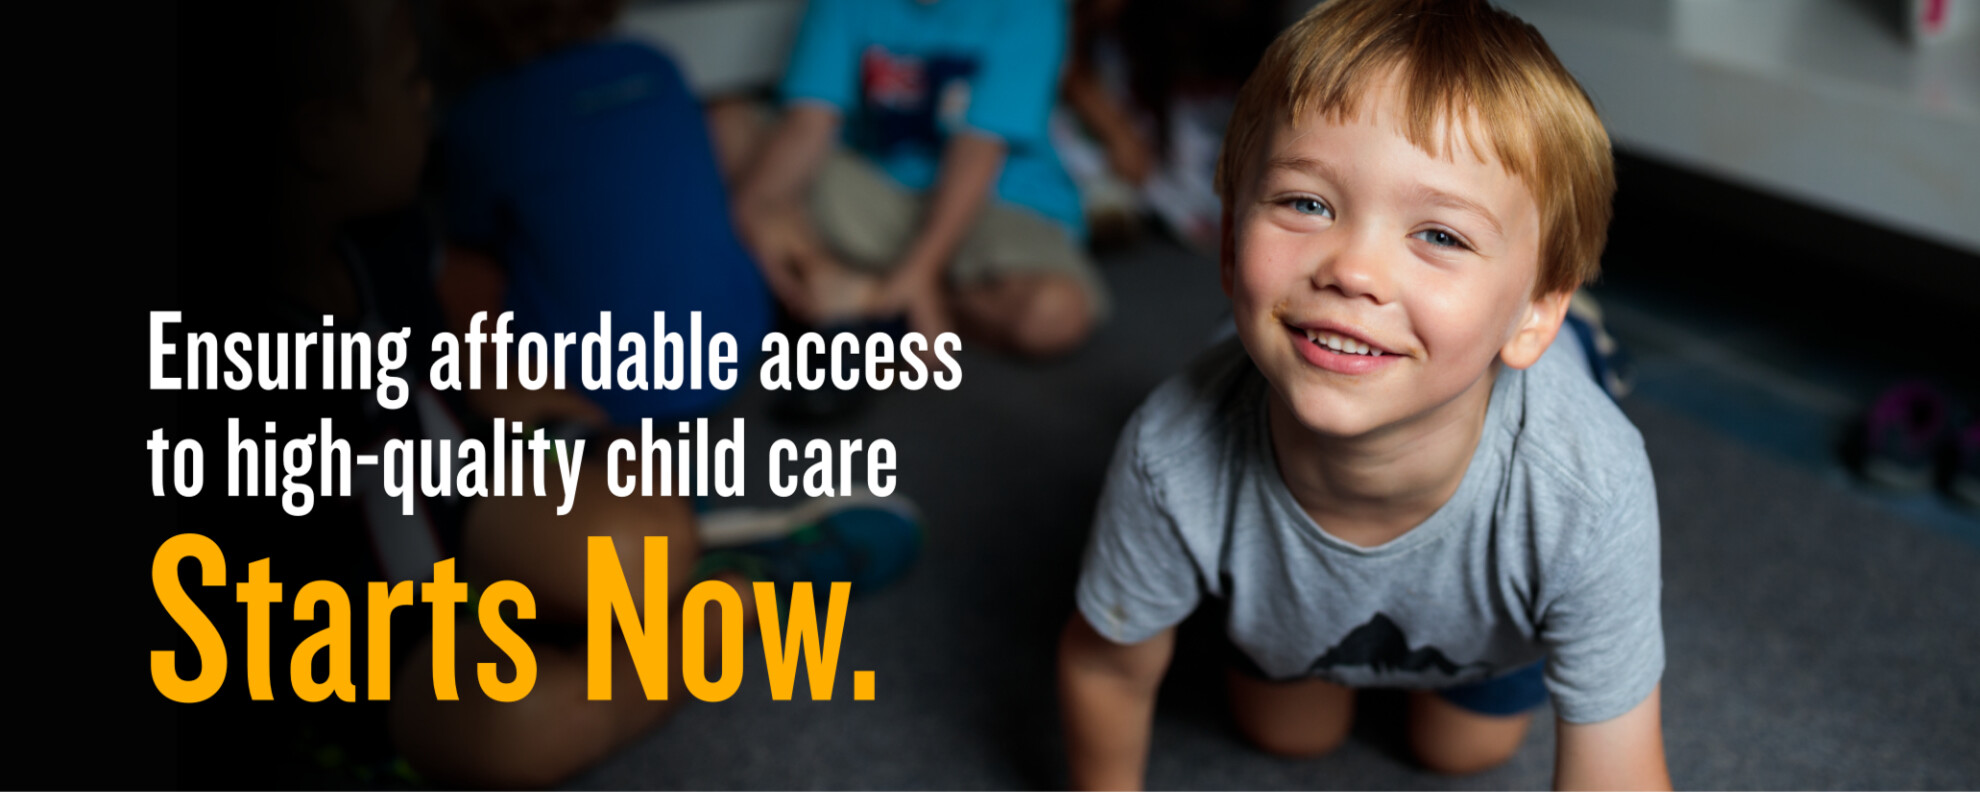 Ensuring affordable access to high-quality child care Starts Now.